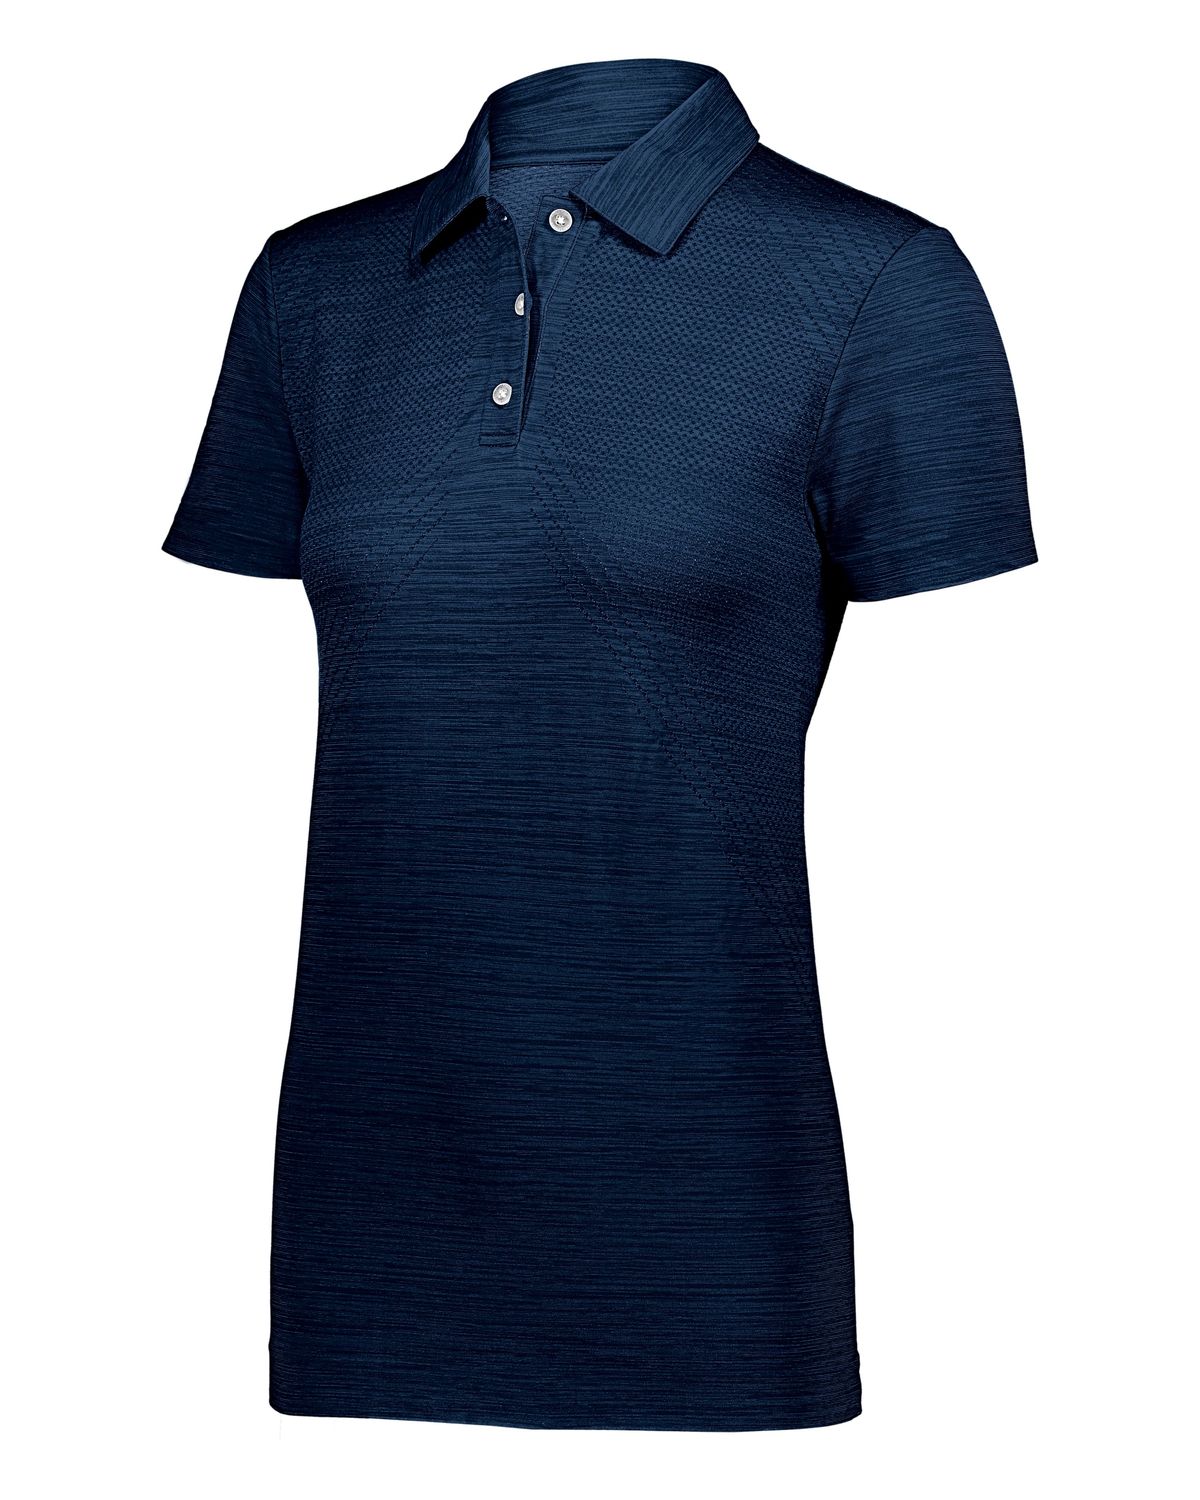 'Holloway 222756 Ladies Striated Polo'